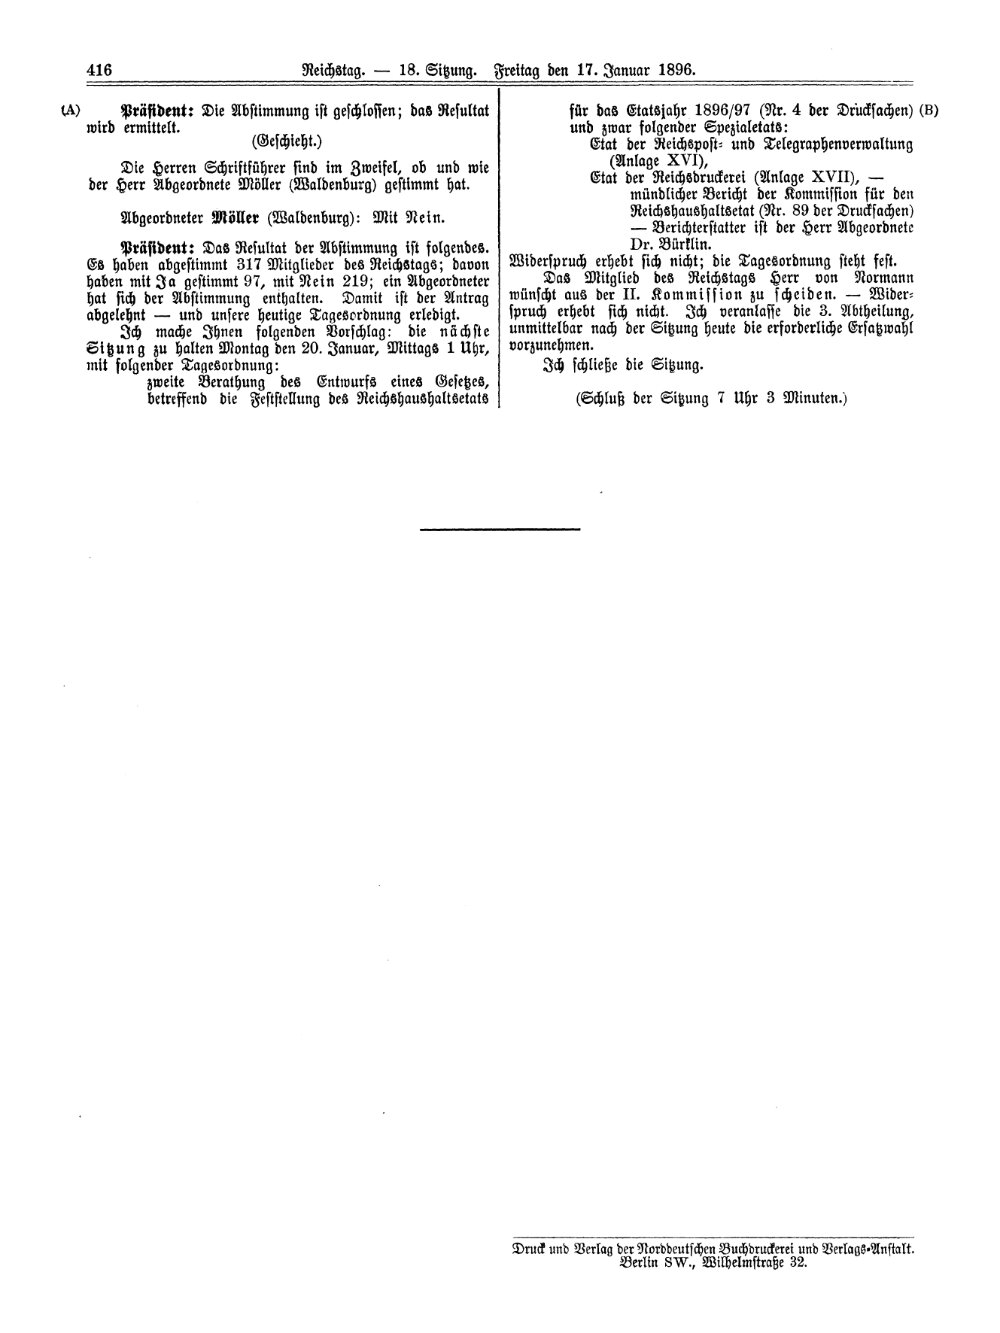 Scan of page 416